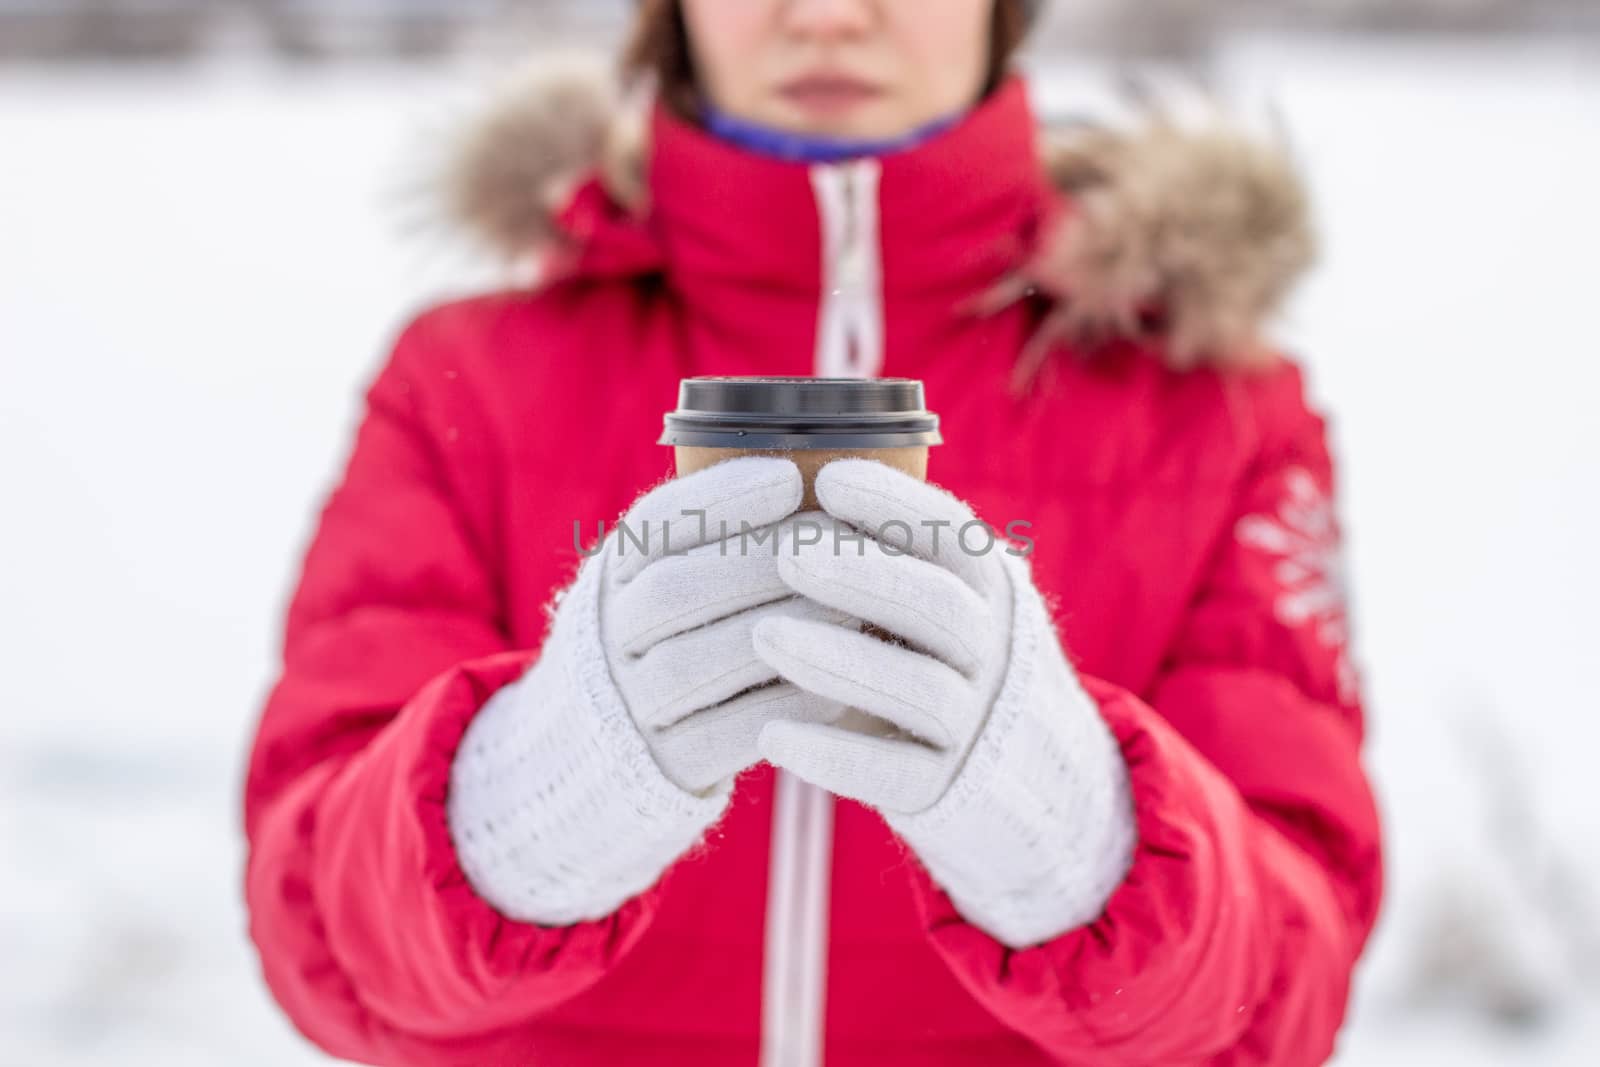 A young woman in a red jacket in winter holds a glass of hot coffee or tea. A snowy winter and a hot drink to keep you warm. A glass of coffee in winter.